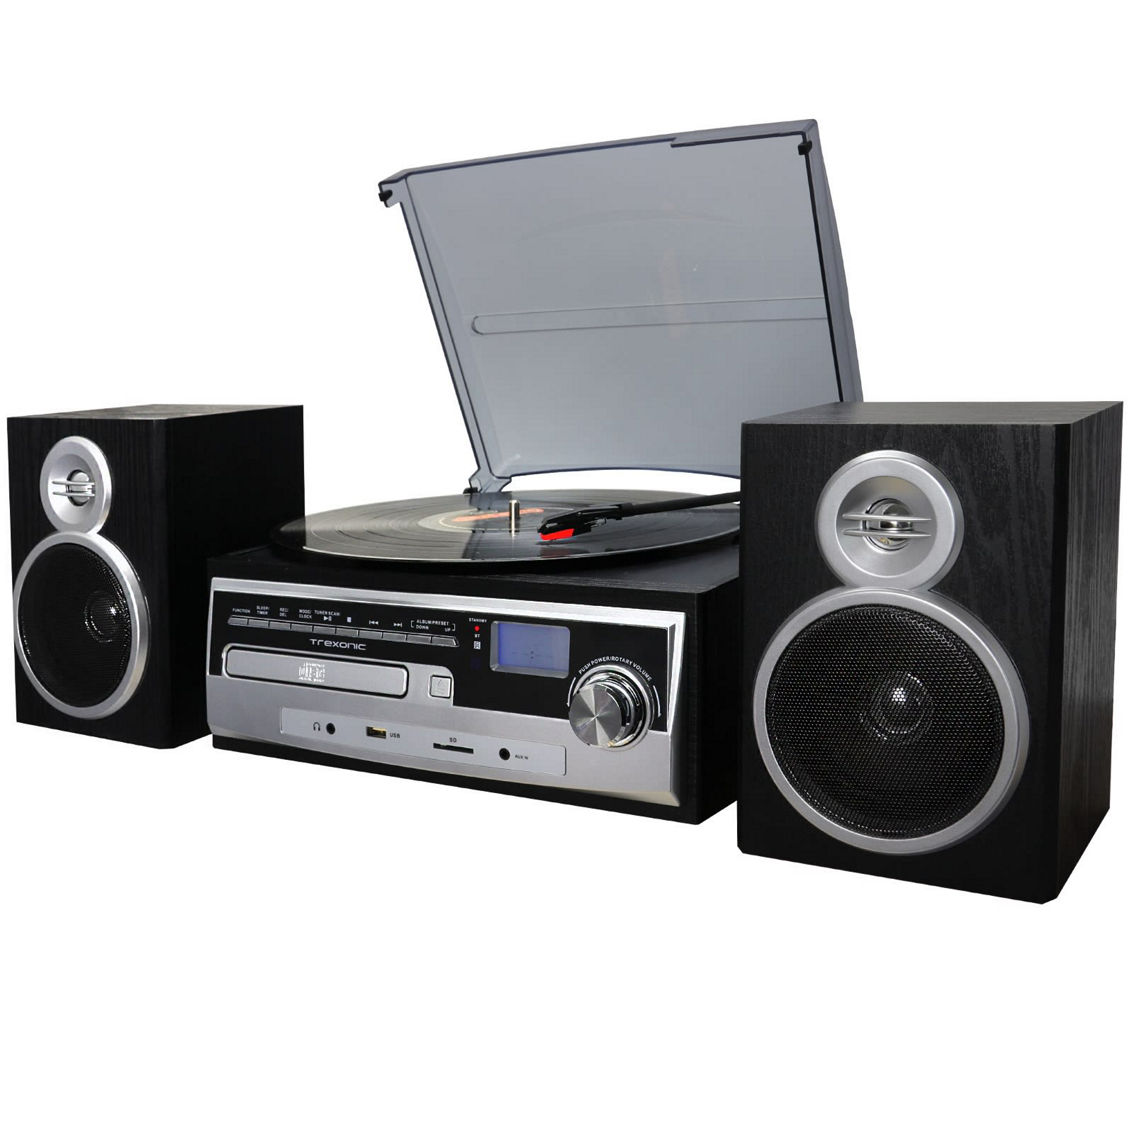 Trexonic 3-Speed Vinyl Turntable Home Stereo System with CD Player, FM Radio, Bl - Image 5 of 5